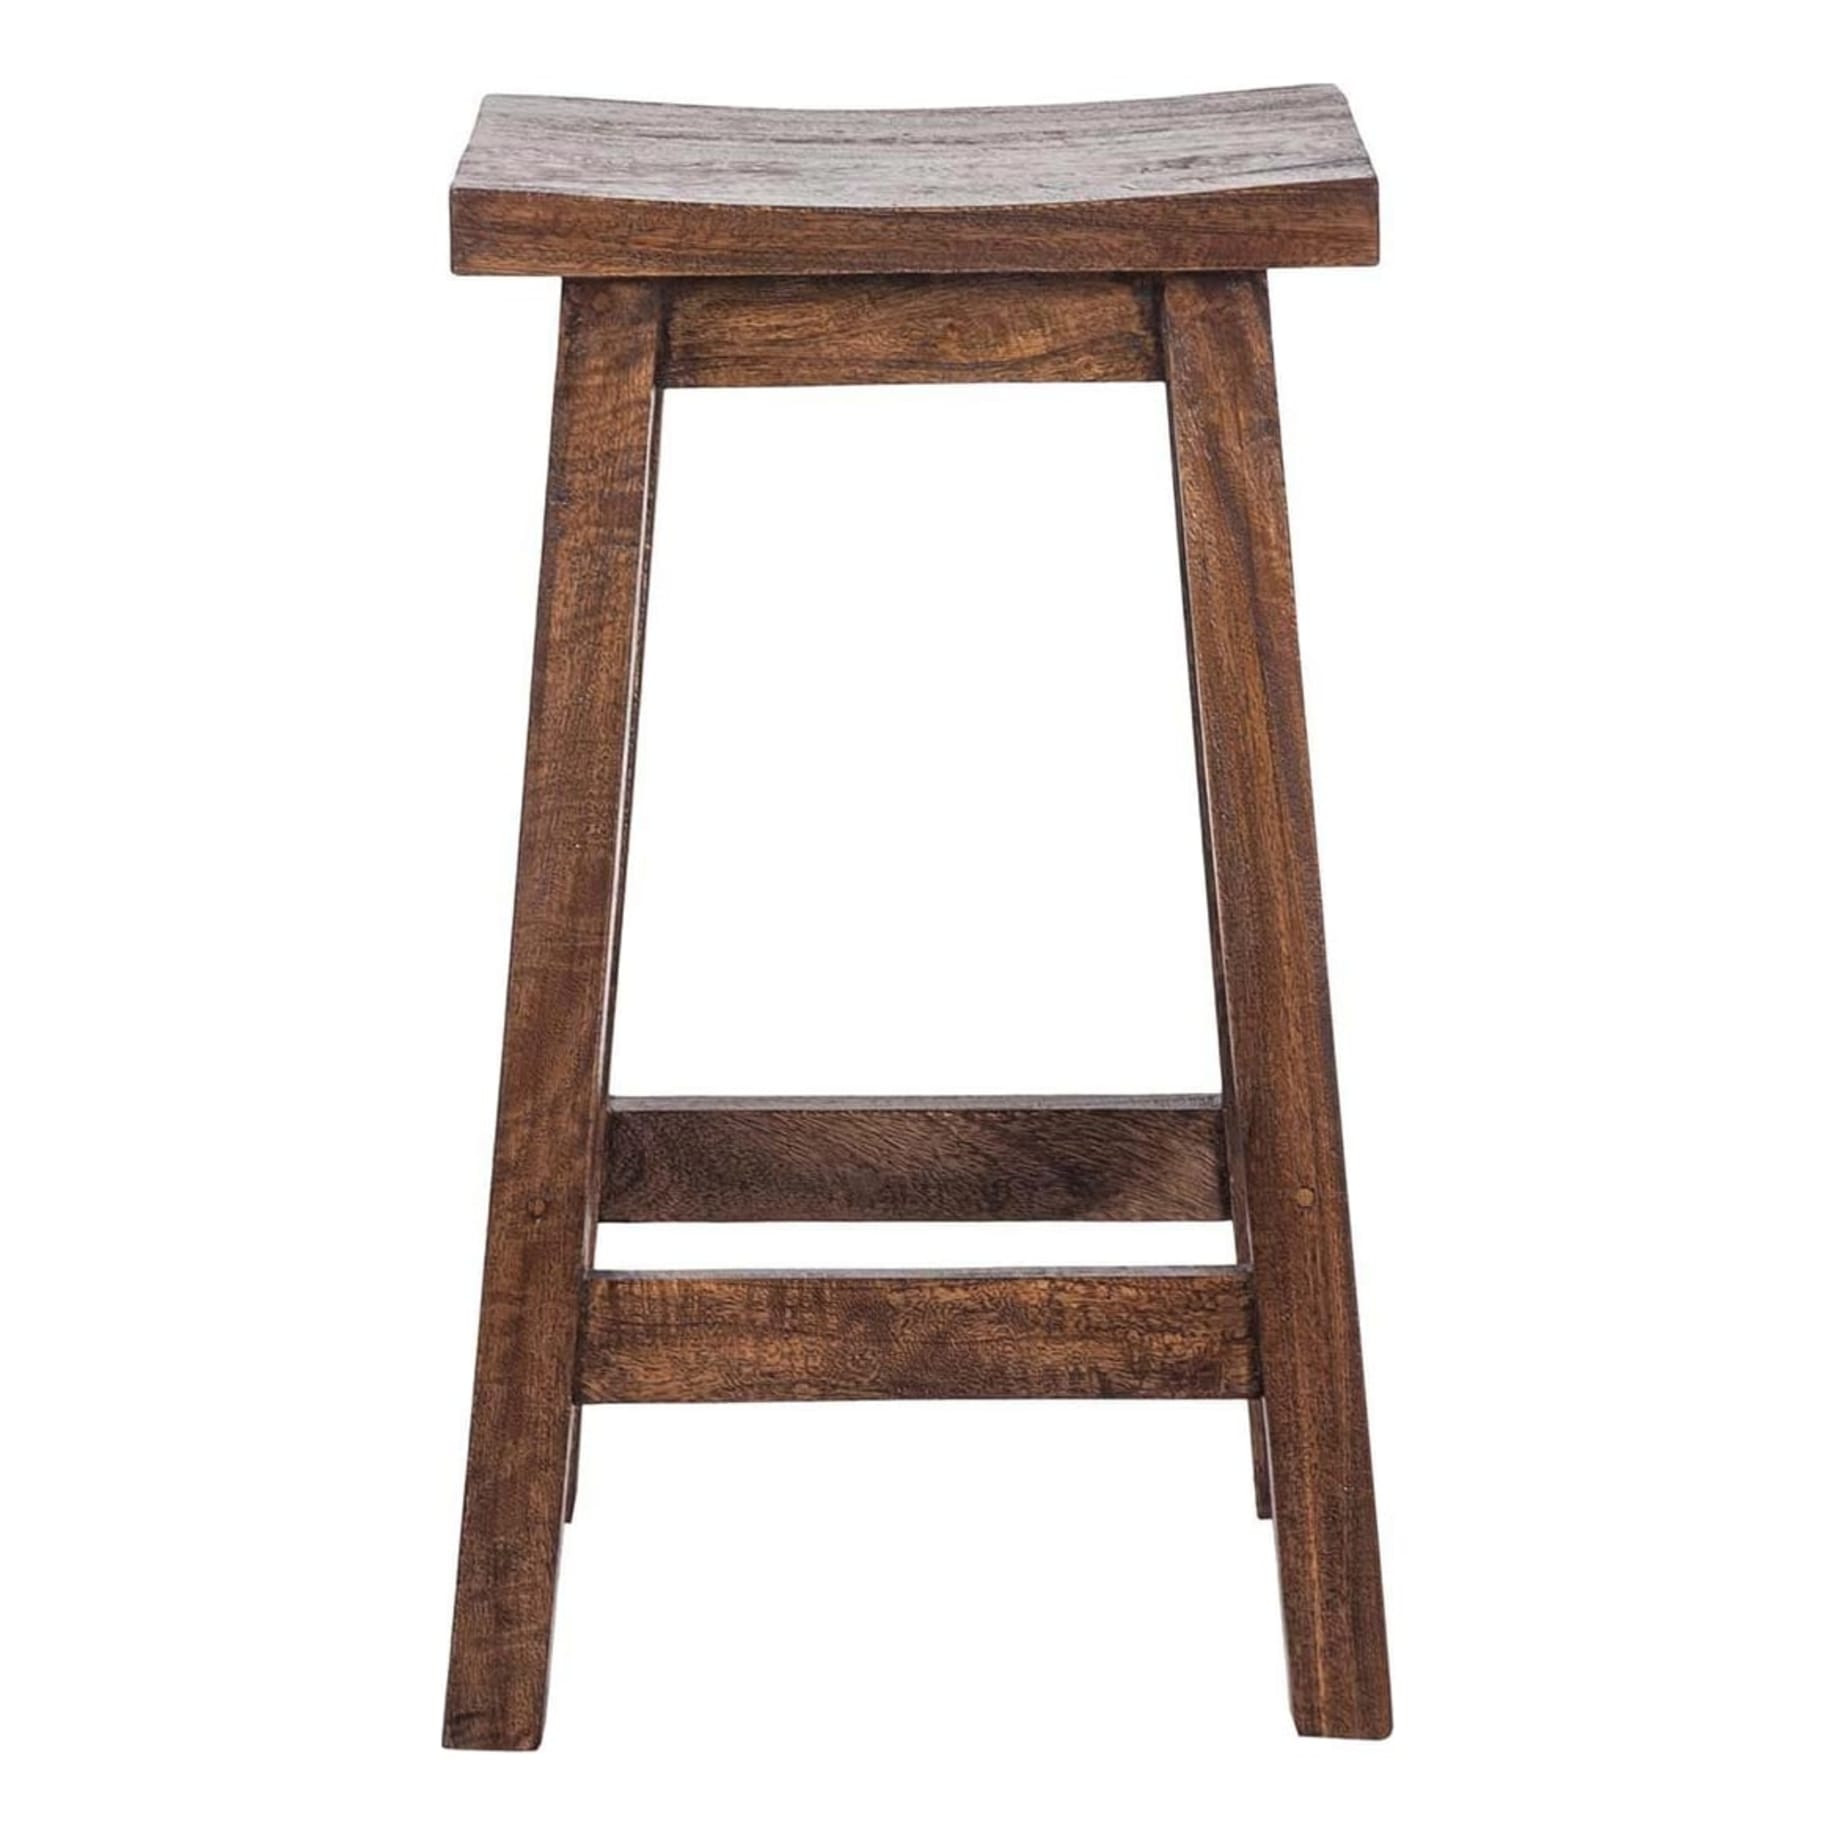 Seacliff Stool in Mangowood Antique Brown